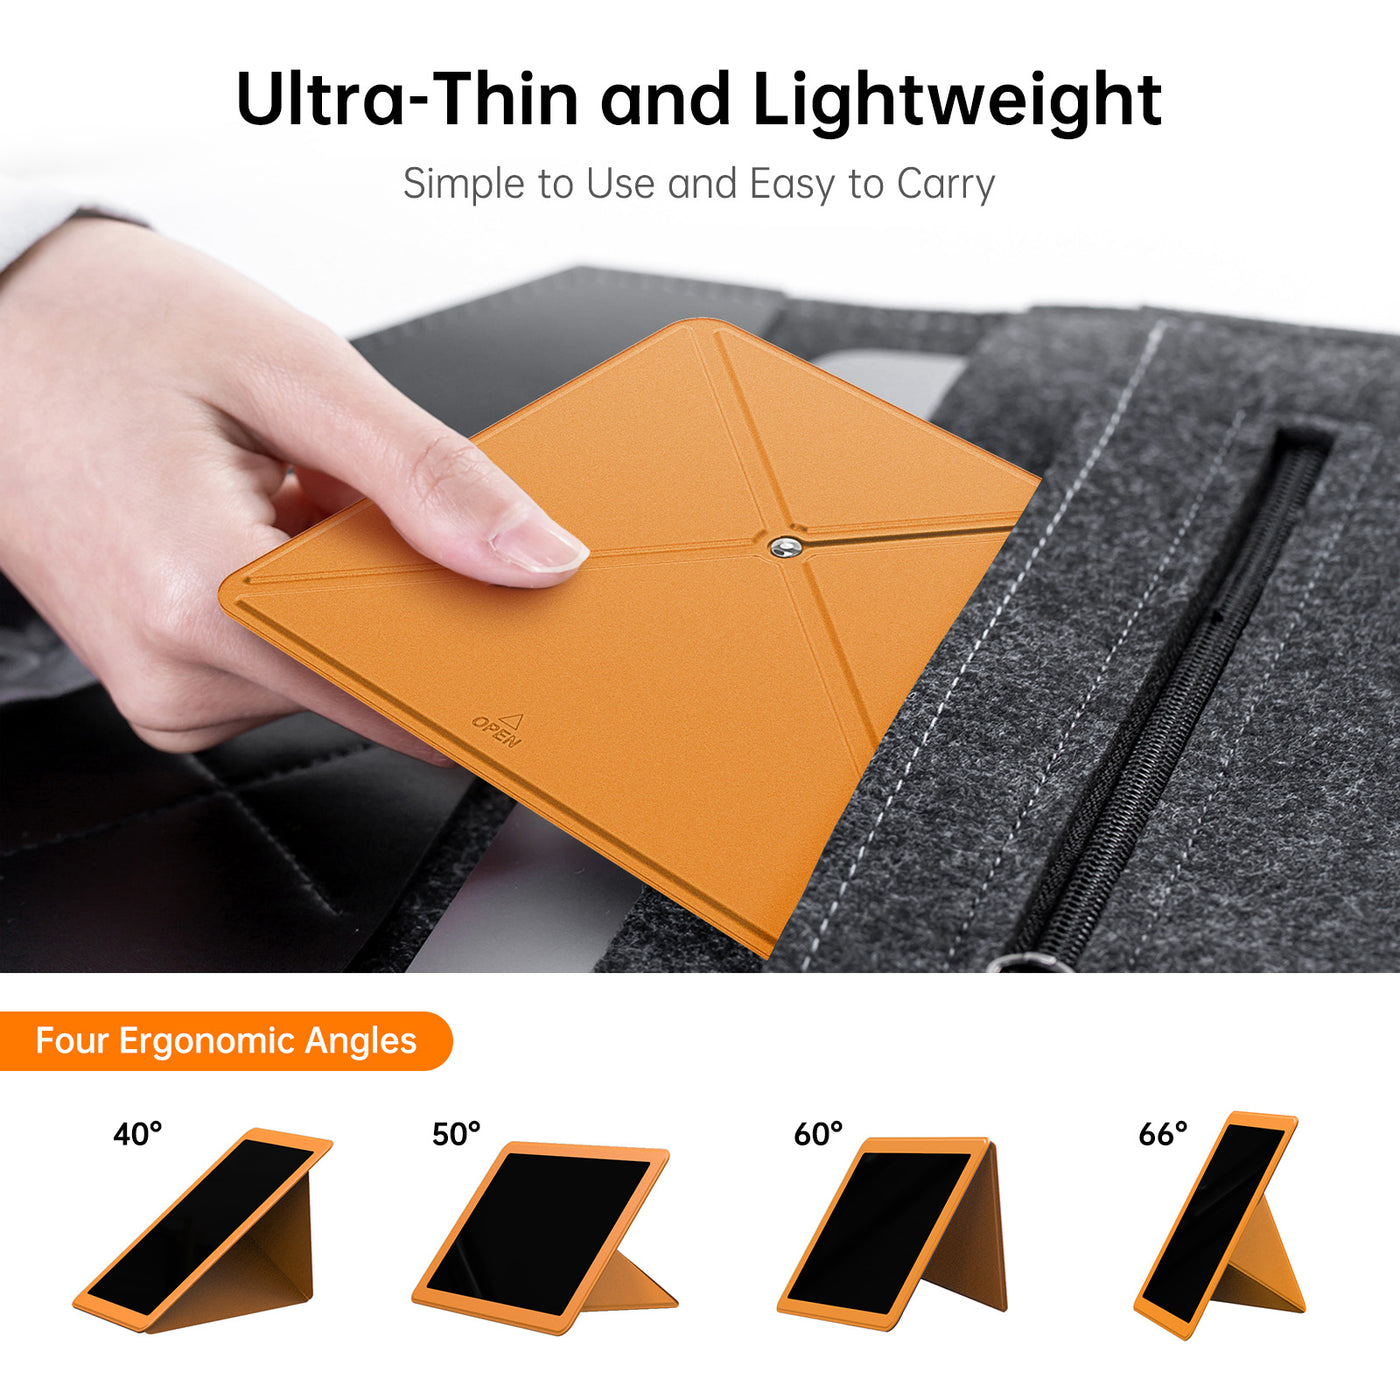 Ultra-Thin and Lightweight tablet stand